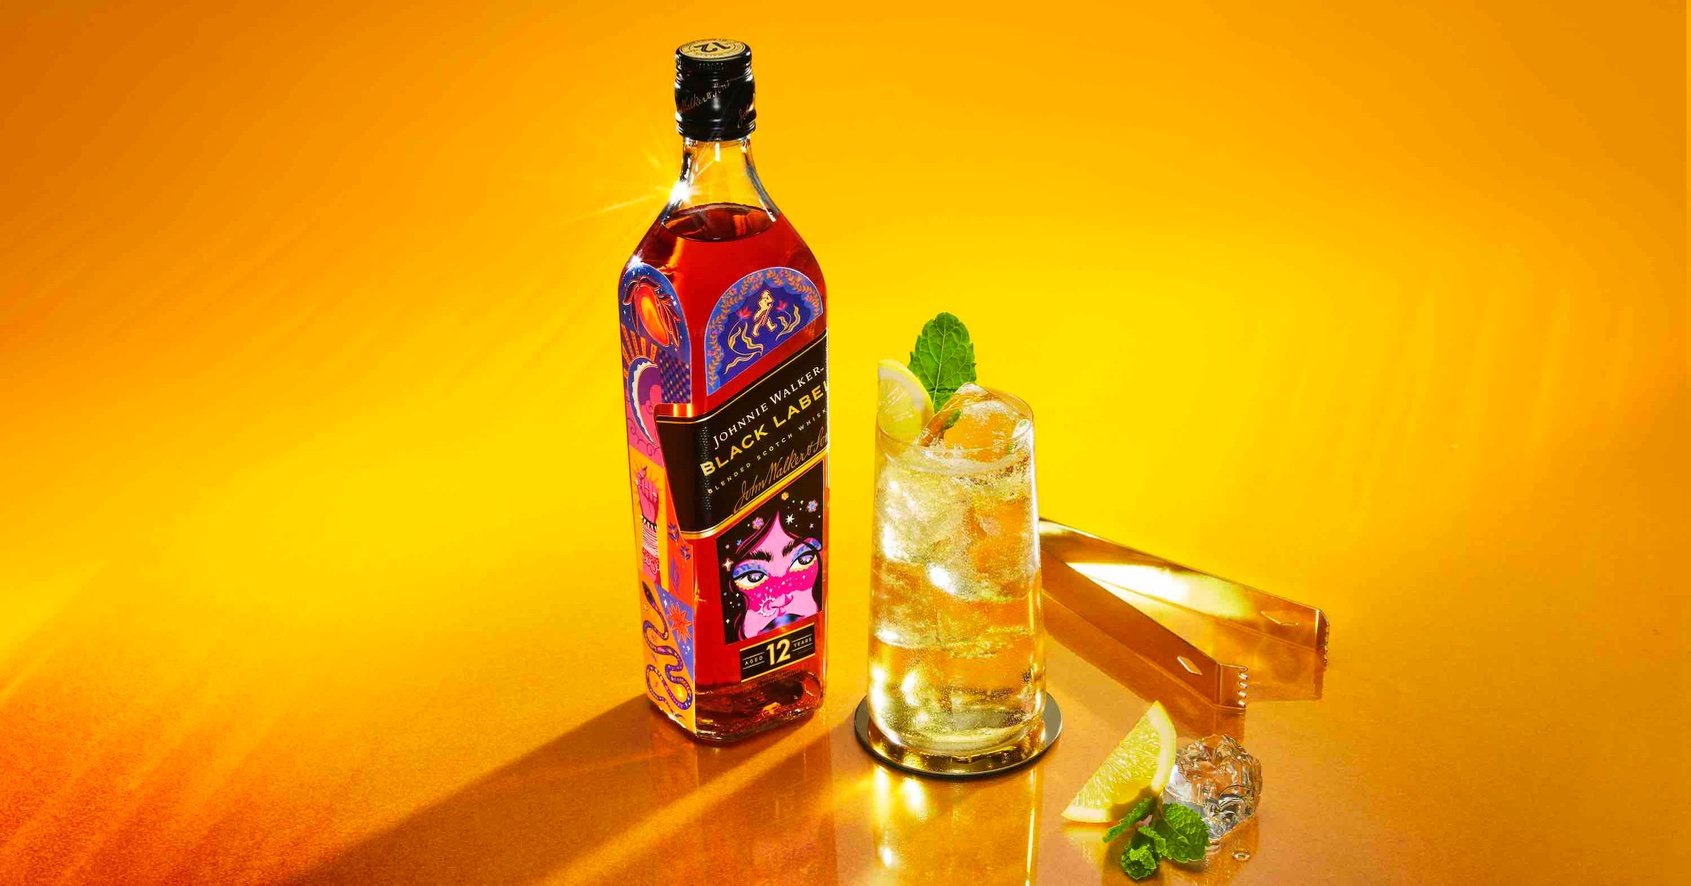 Johnnie Walker Celebrates British South Asian Creativity With New Limited Edition ‘Bold Steps’ Bottle